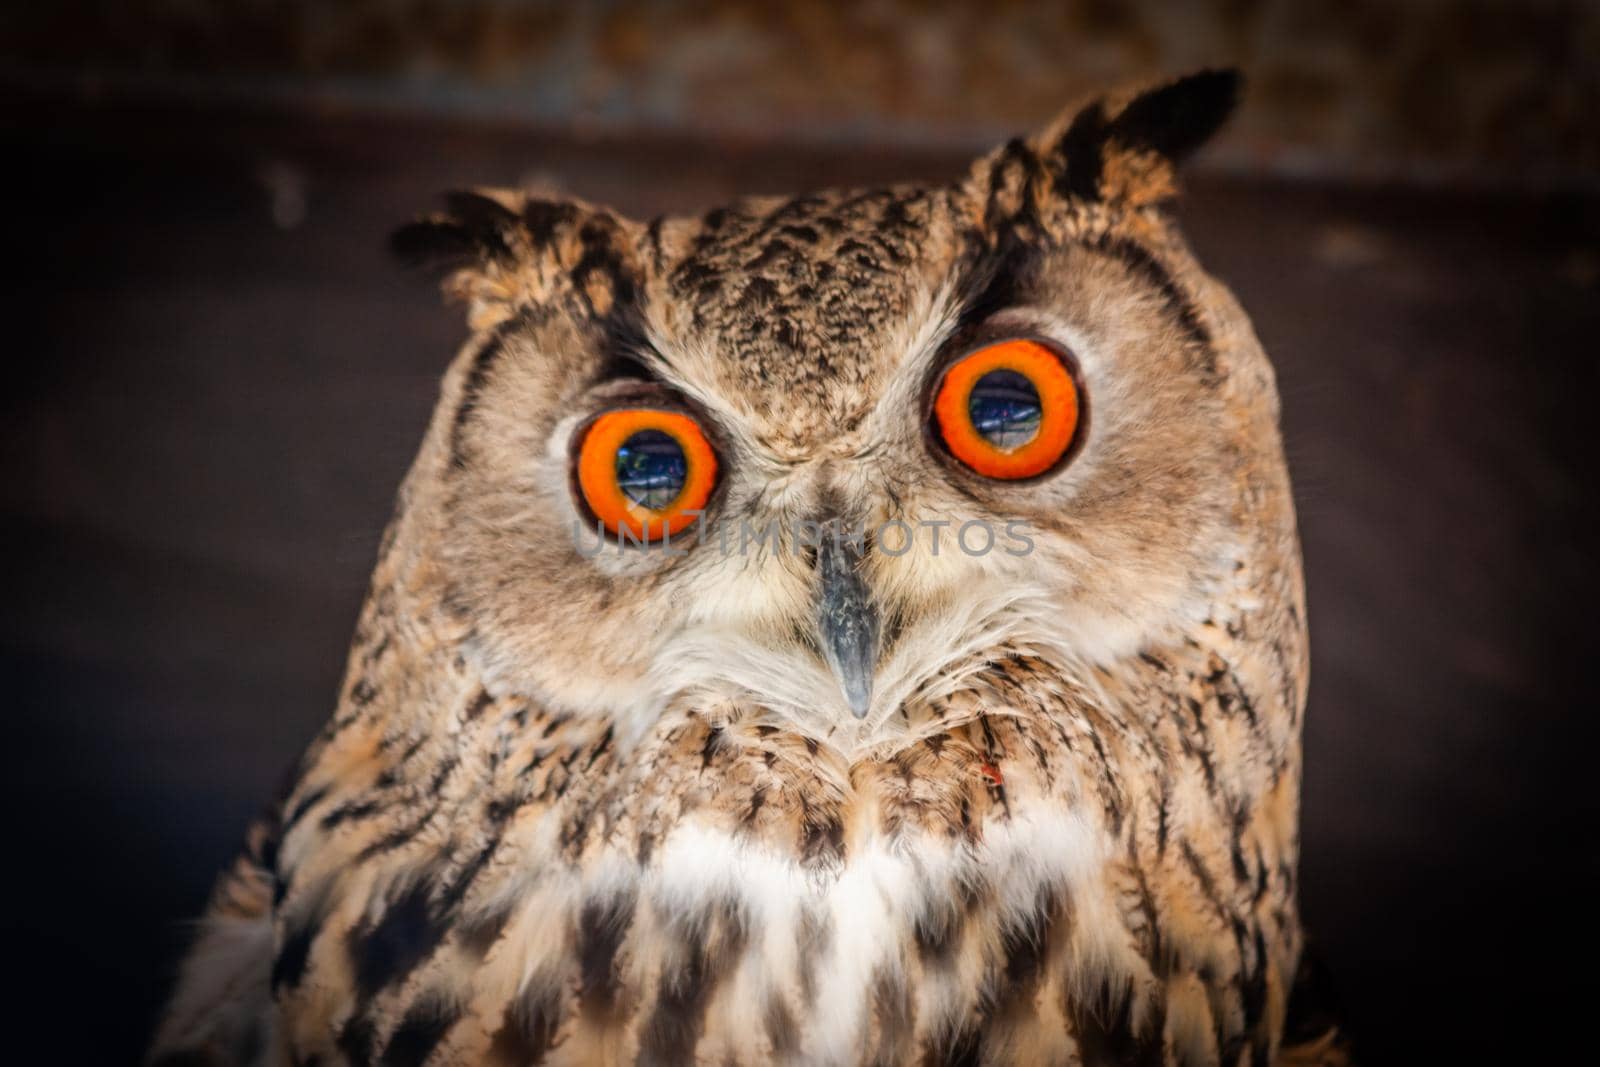 Funny owl portrait looking at camera. Wildlife bird outdoors.